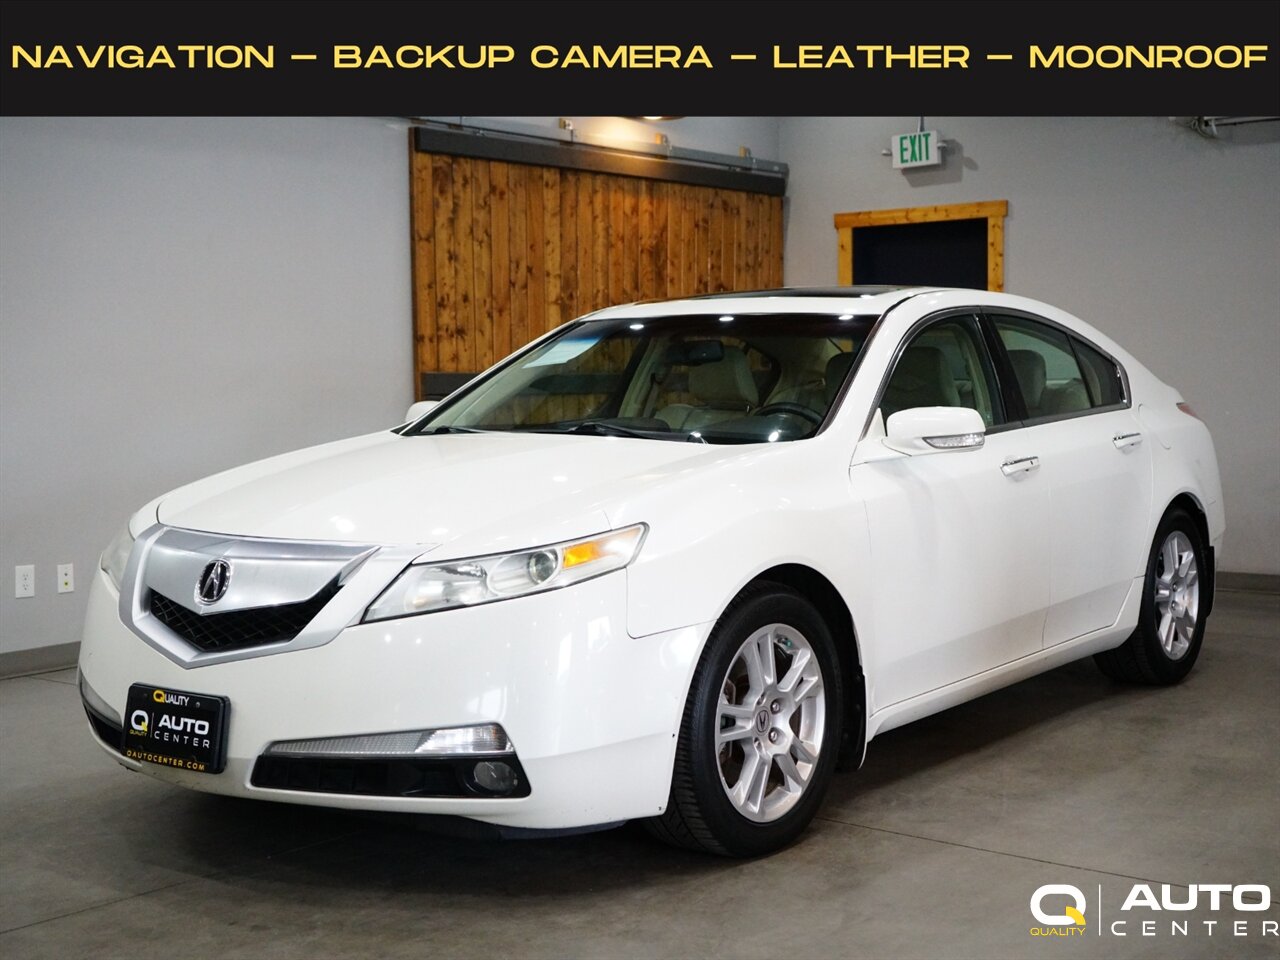 2010 Acura TL FWD with Technology Package